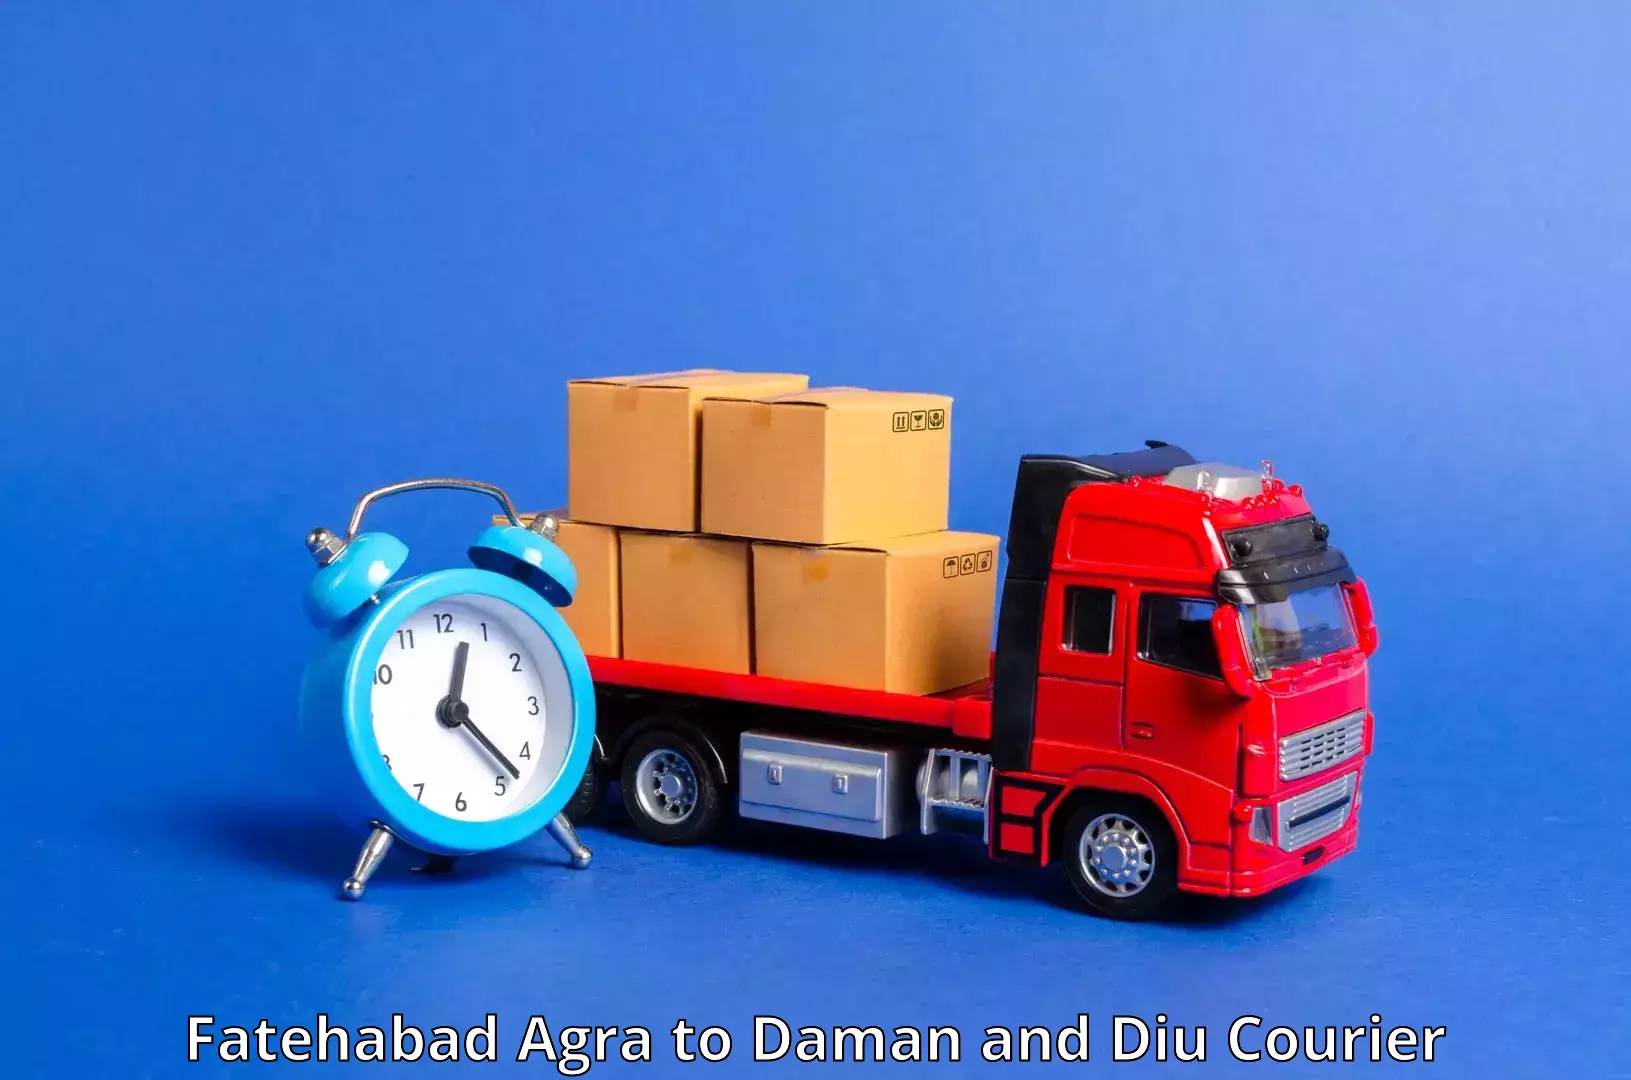 High-speed delivery Fatehabad Agra to Daman and Diu